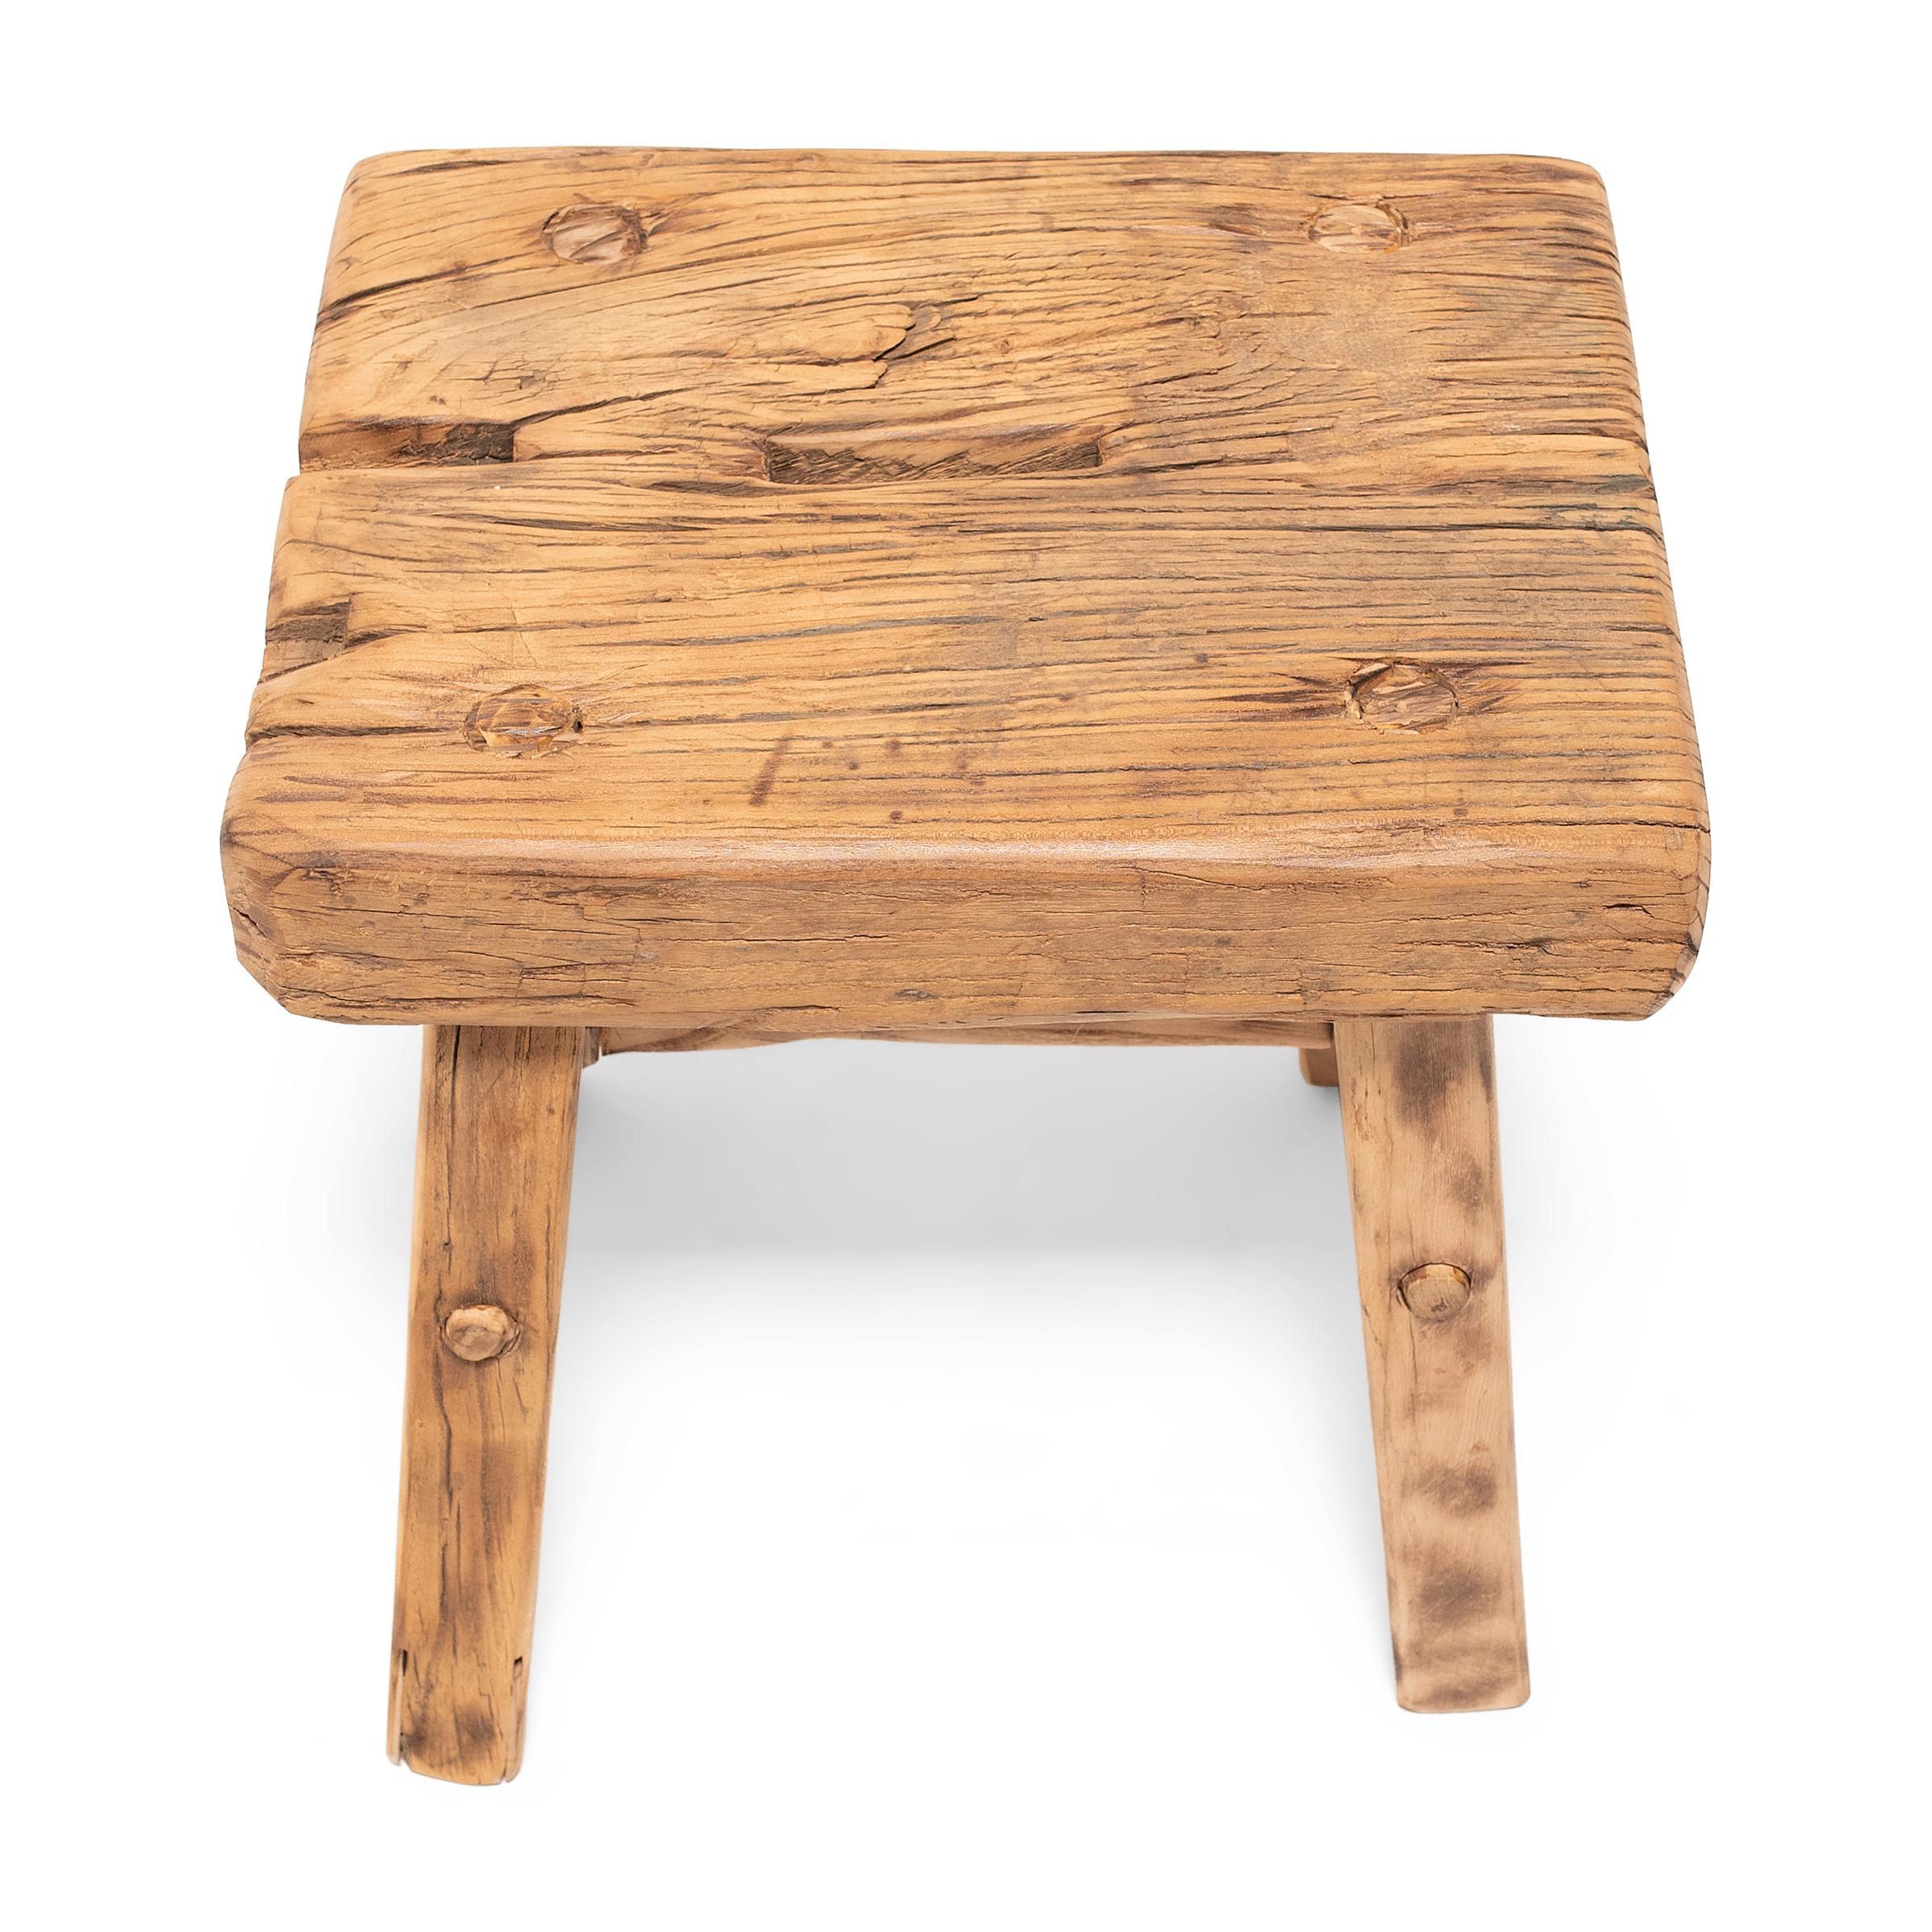 Chinese Reclaimed Elm Square Stool For Sale